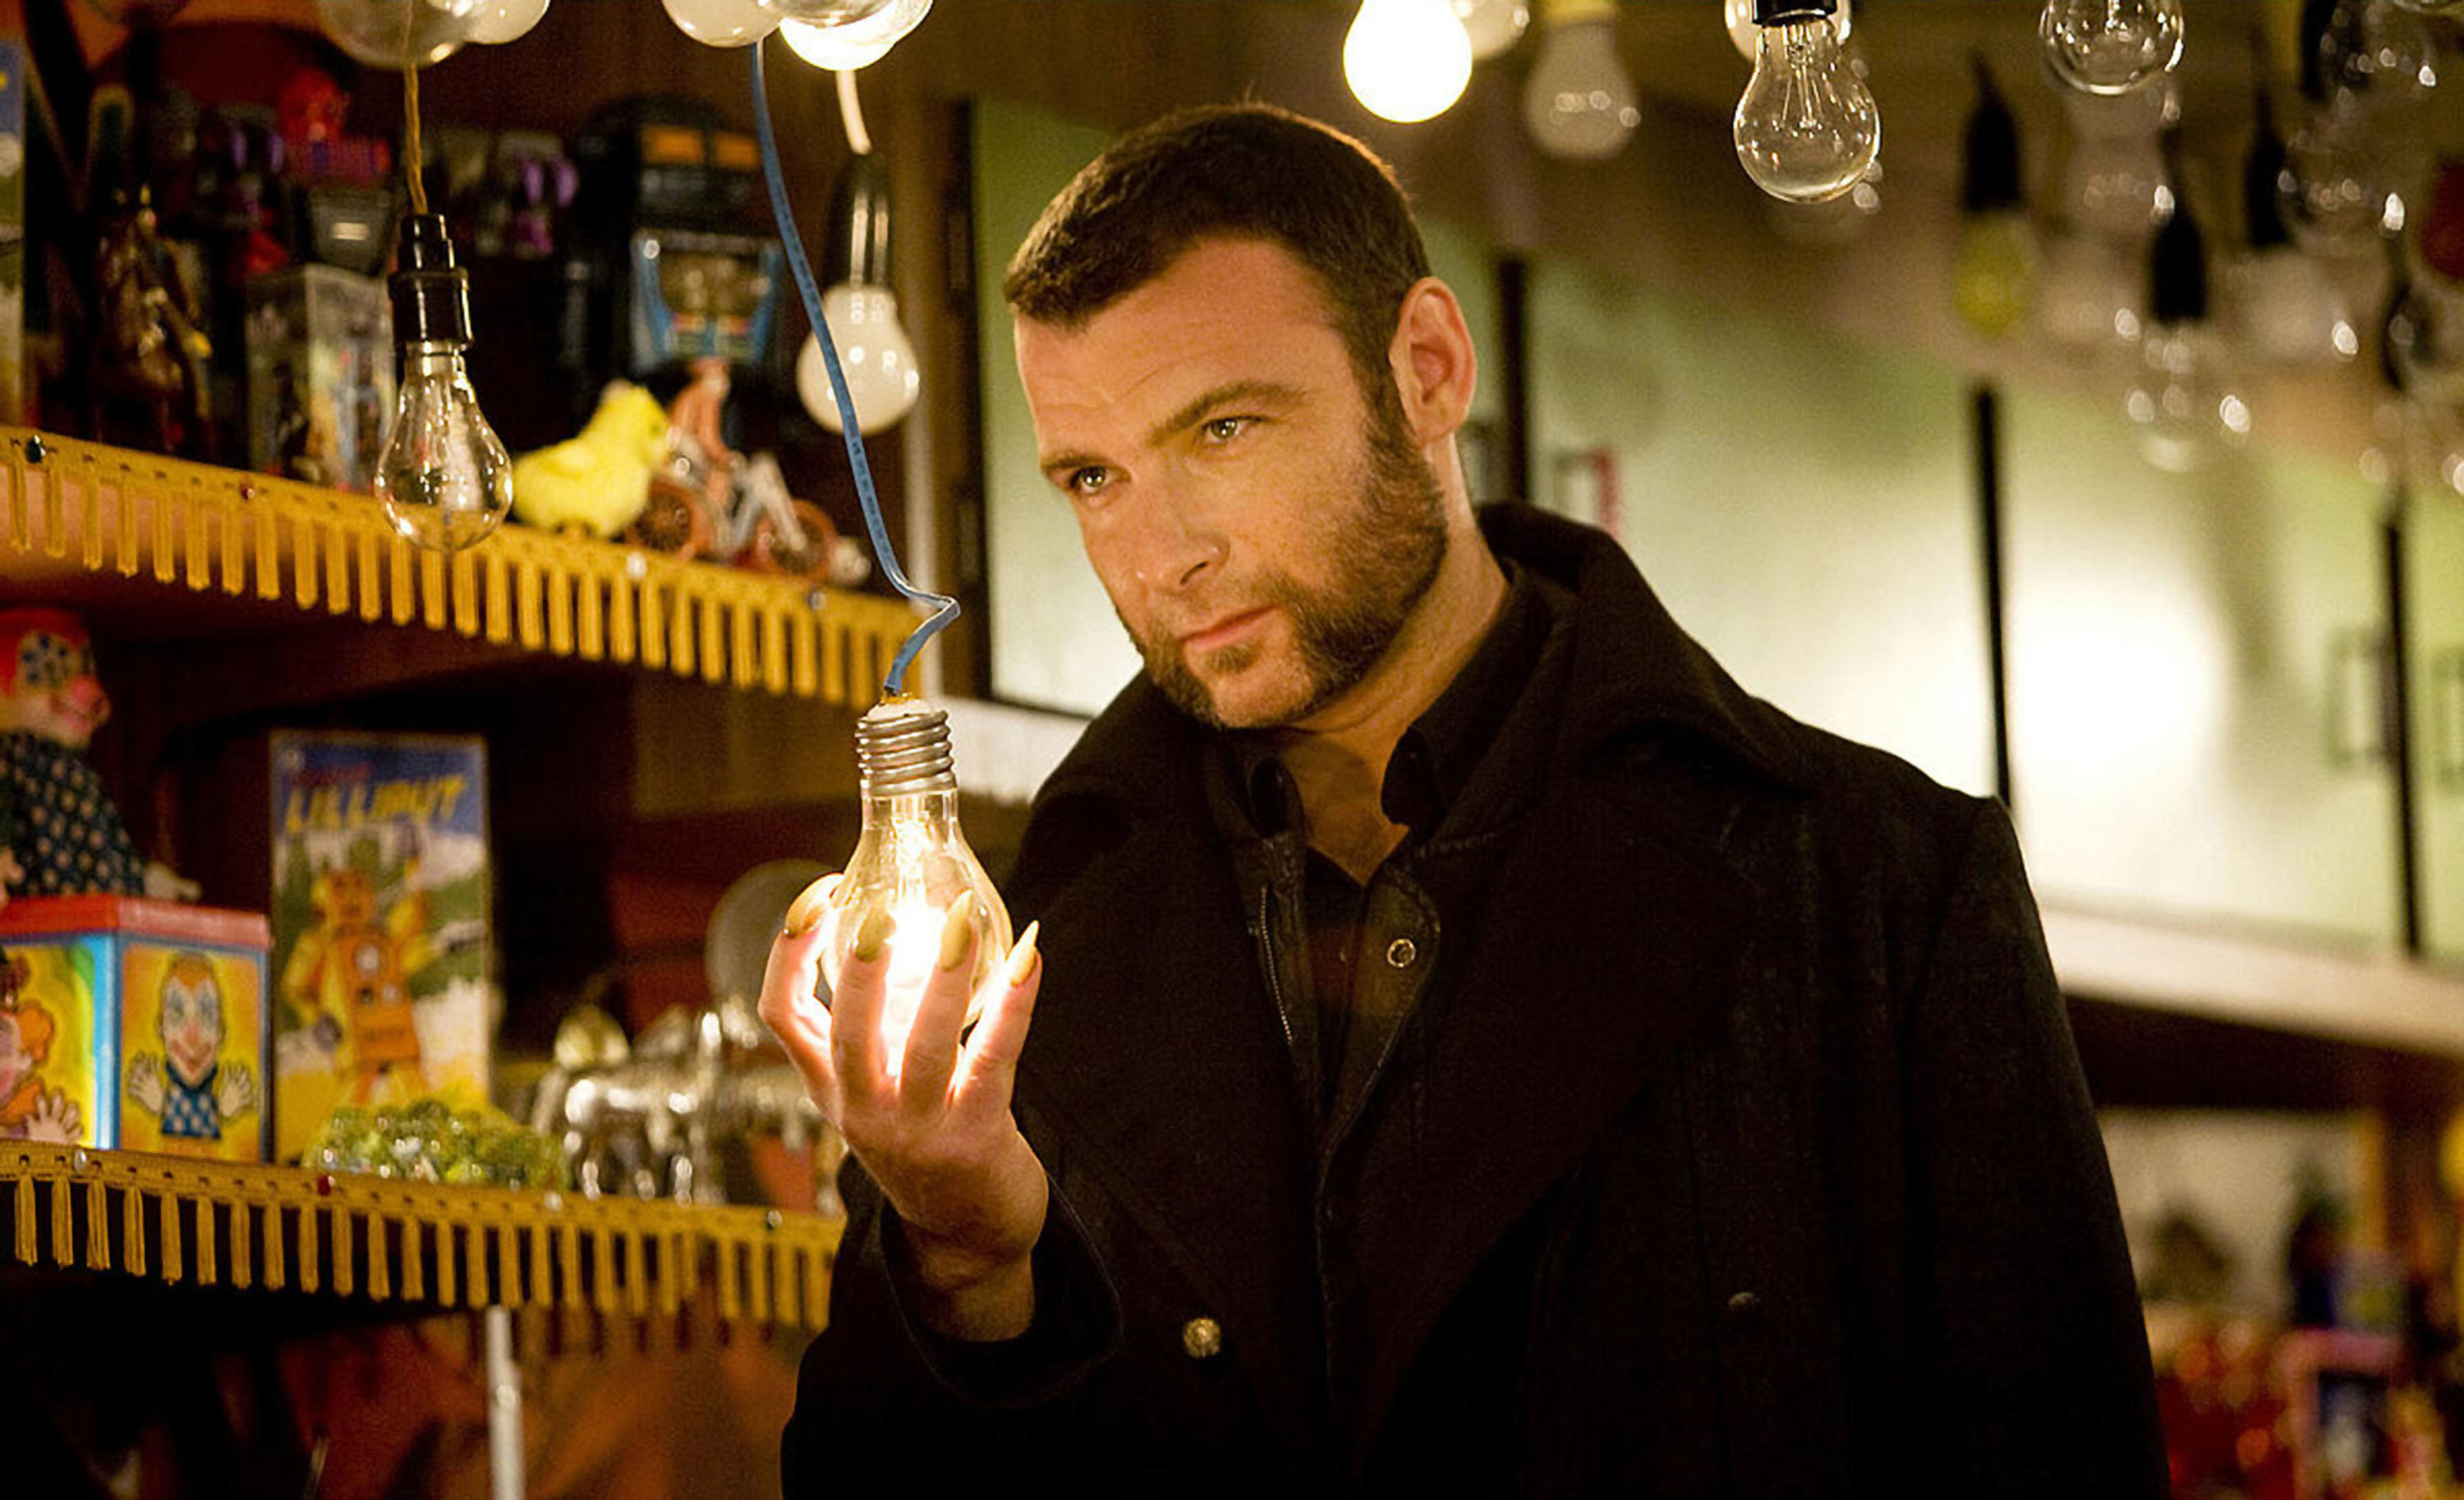 A man with mutton chops, an overcoat and sharp fingernails holds a light bulb menacingly